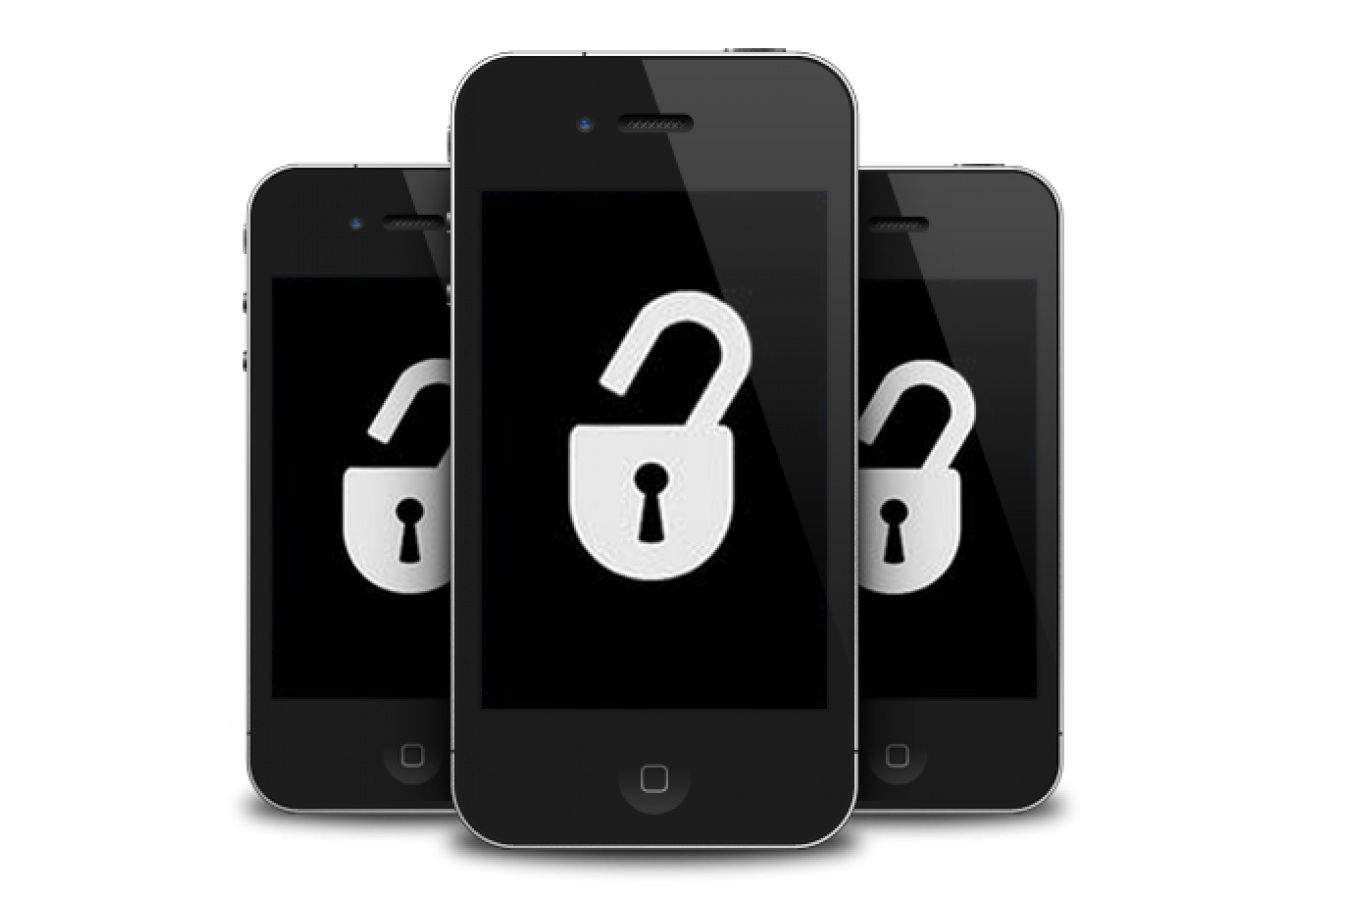 The leaky apps debacle raises more questions about smartphone security.